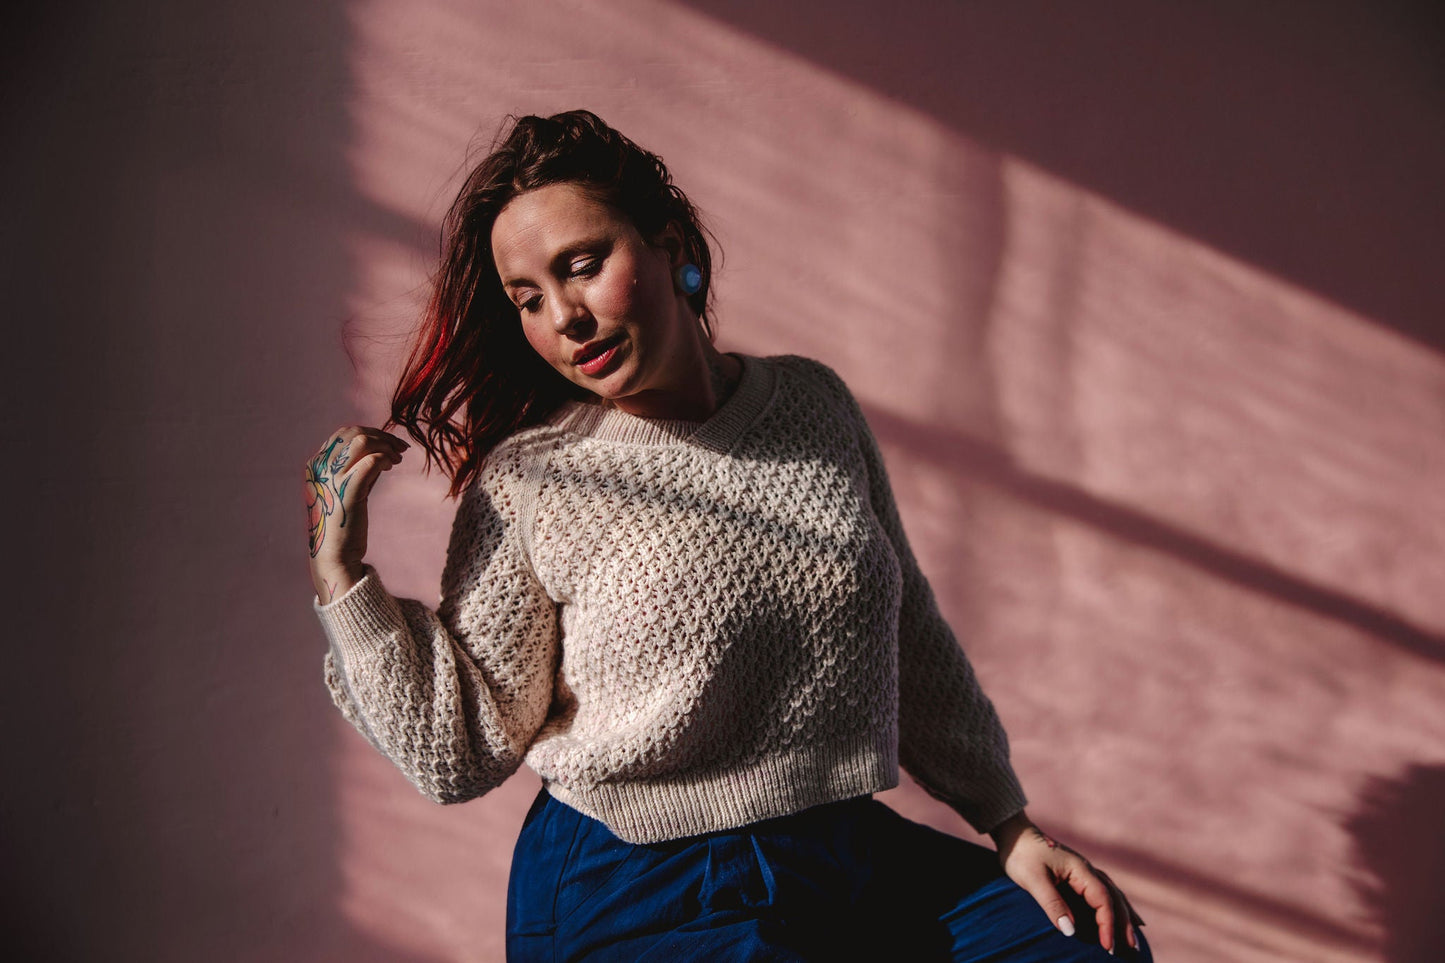 Bess stands outside, with the sun casting shadows over her. She wears a cream colored lace knit raglan sweater.